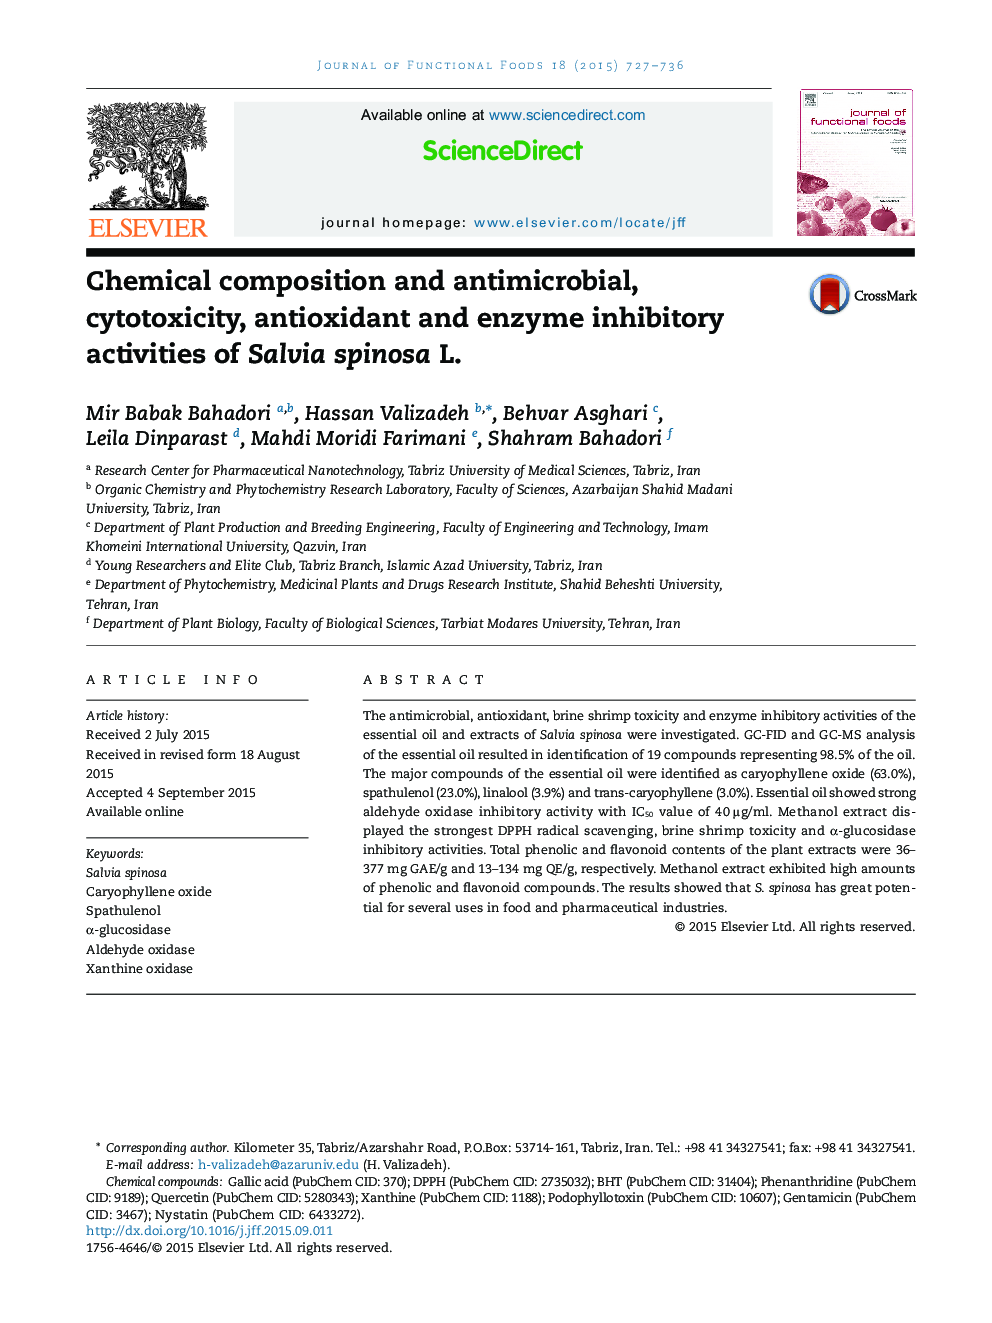 Chemical composition and antimicrobial, cytotoxicity, antioxidant and enzyme inhibitory activities of Salvia spinosa L.